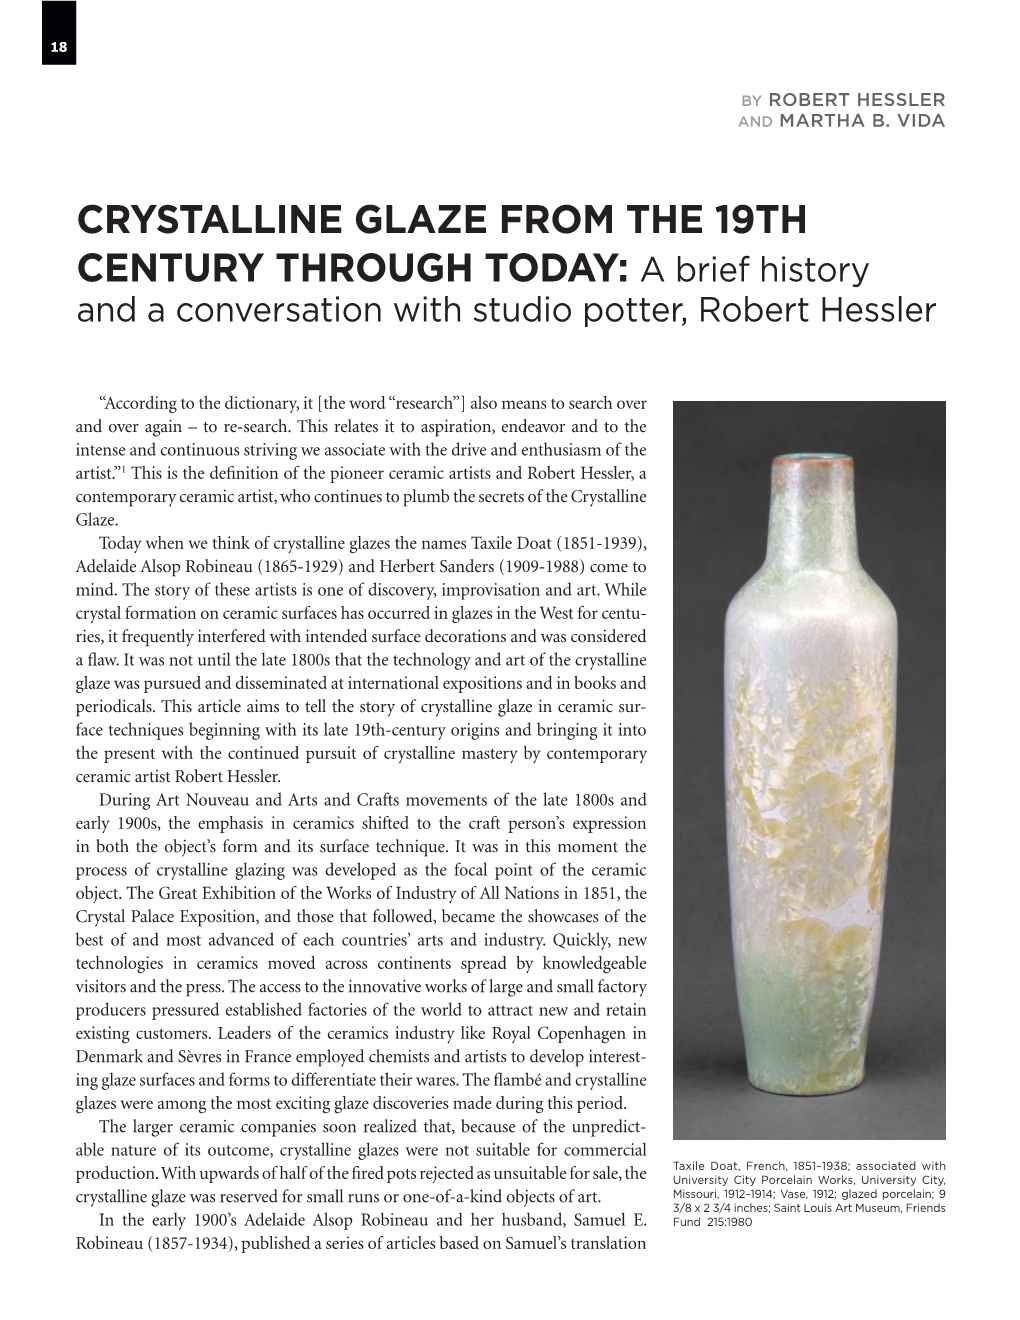 CRYSTALLINE GLAZE from the 19TH CENTURY THROUGH TODAY: a Brief History and a Conversation with Studio Potter, Robert Hessler